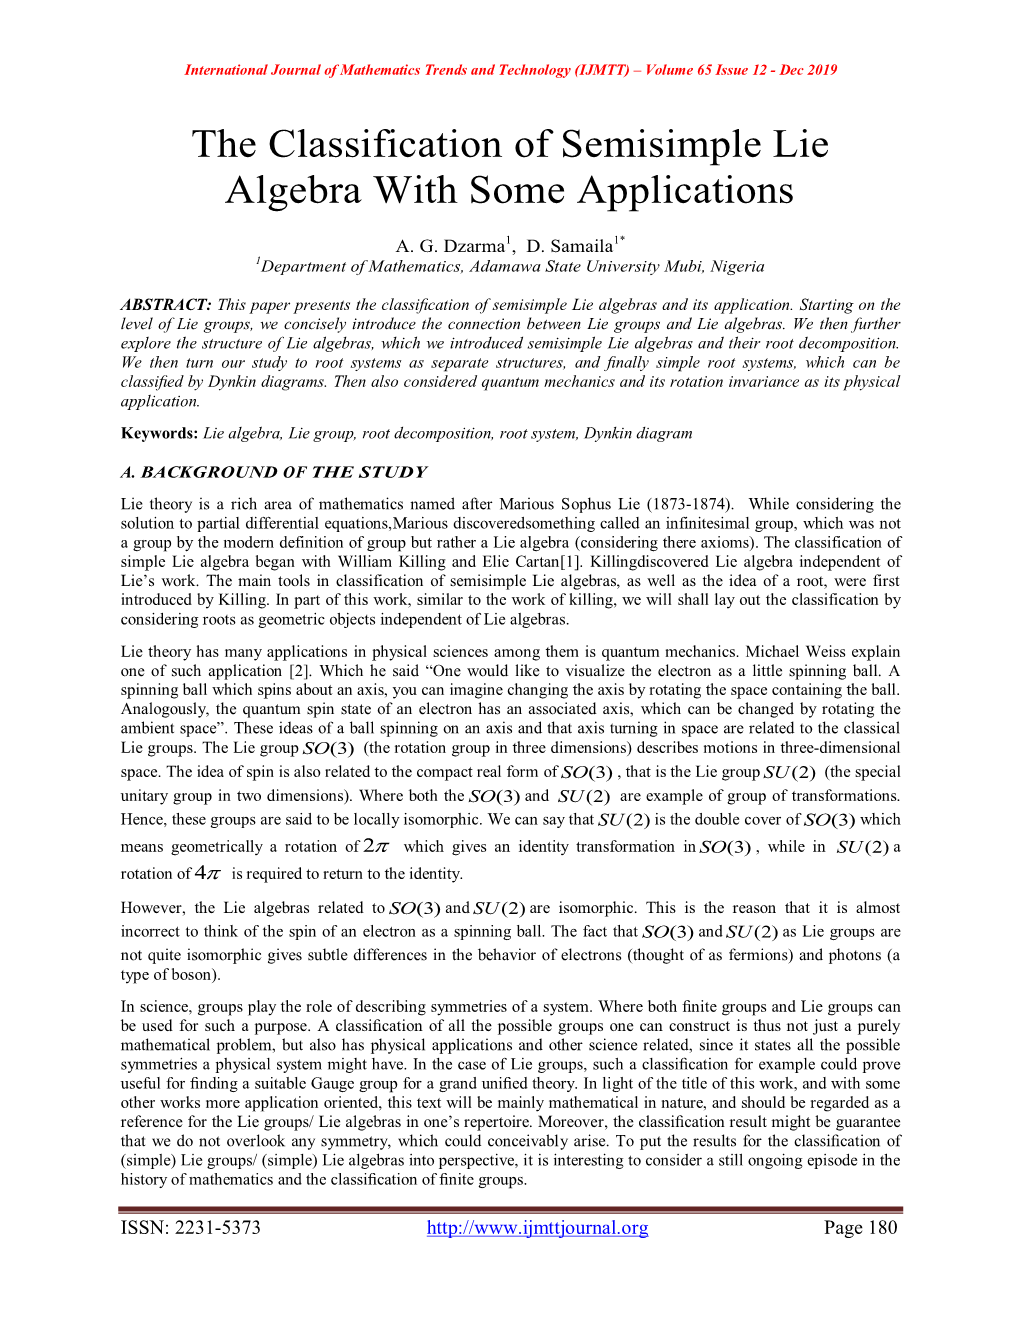 The Classification of Semisimple Lie Algebra with Some Applications